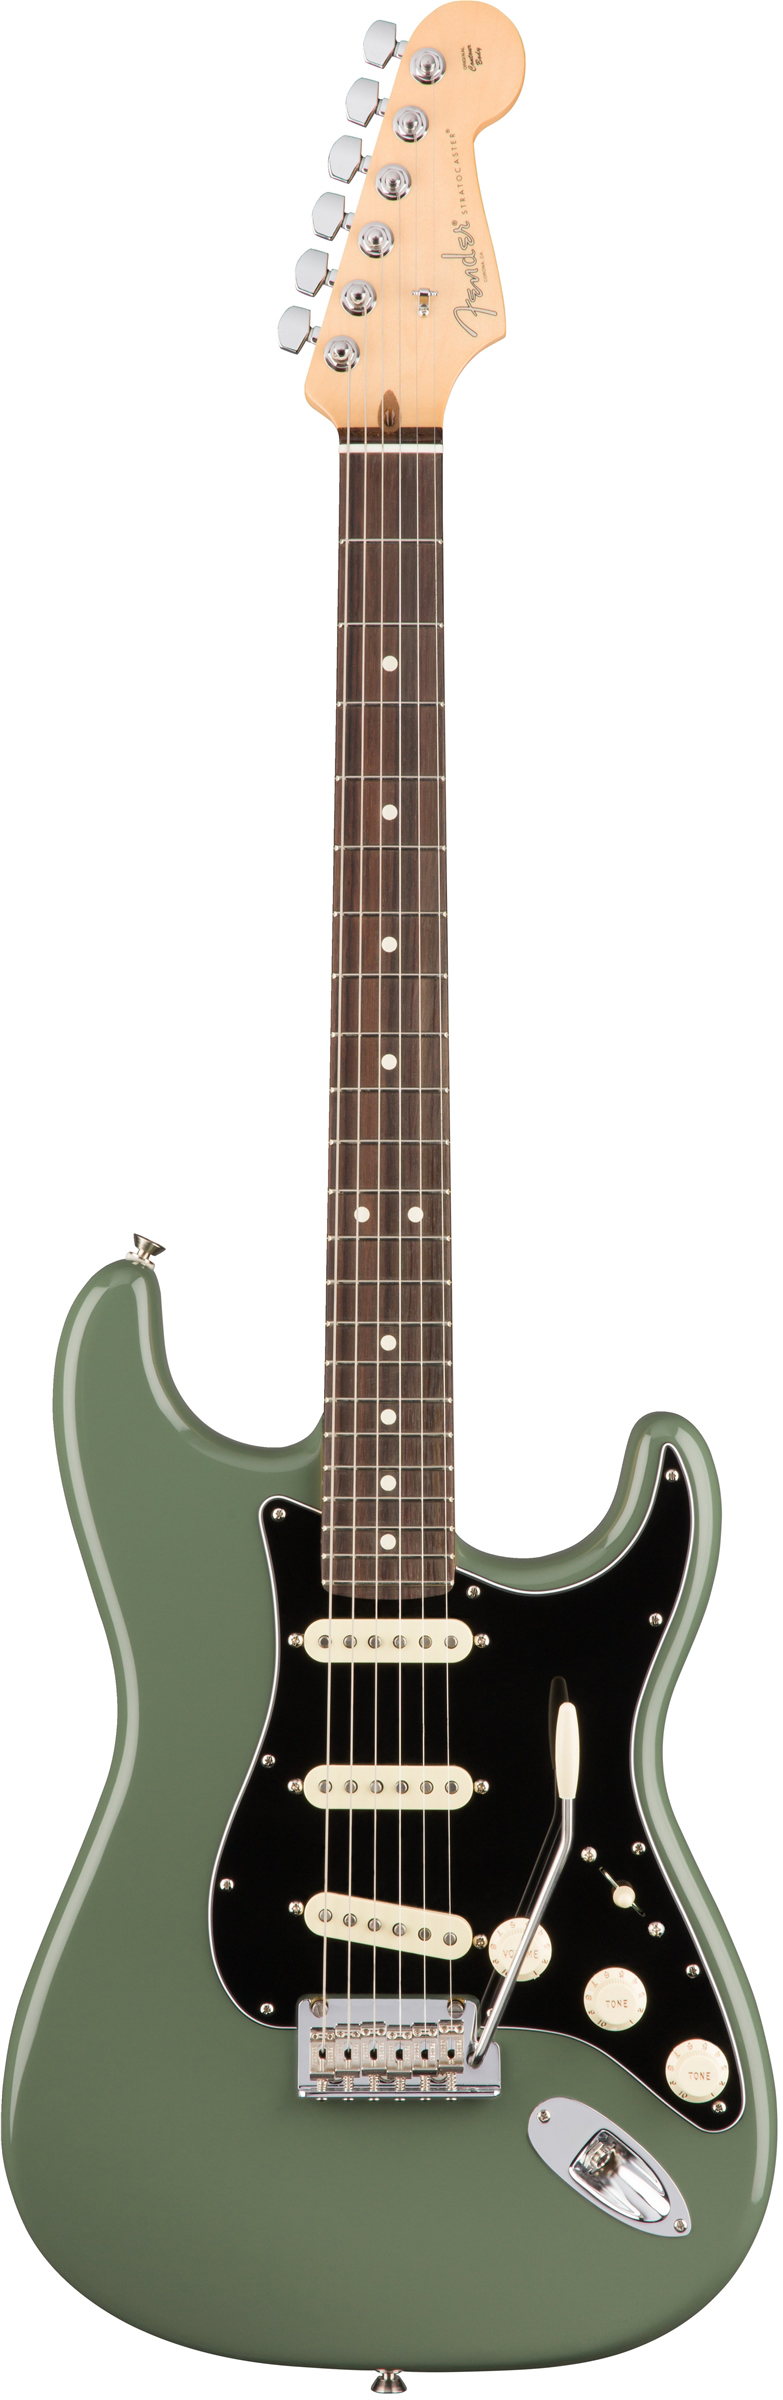 Fender American Professional Stratocaster, Rosewood - Antique Olive